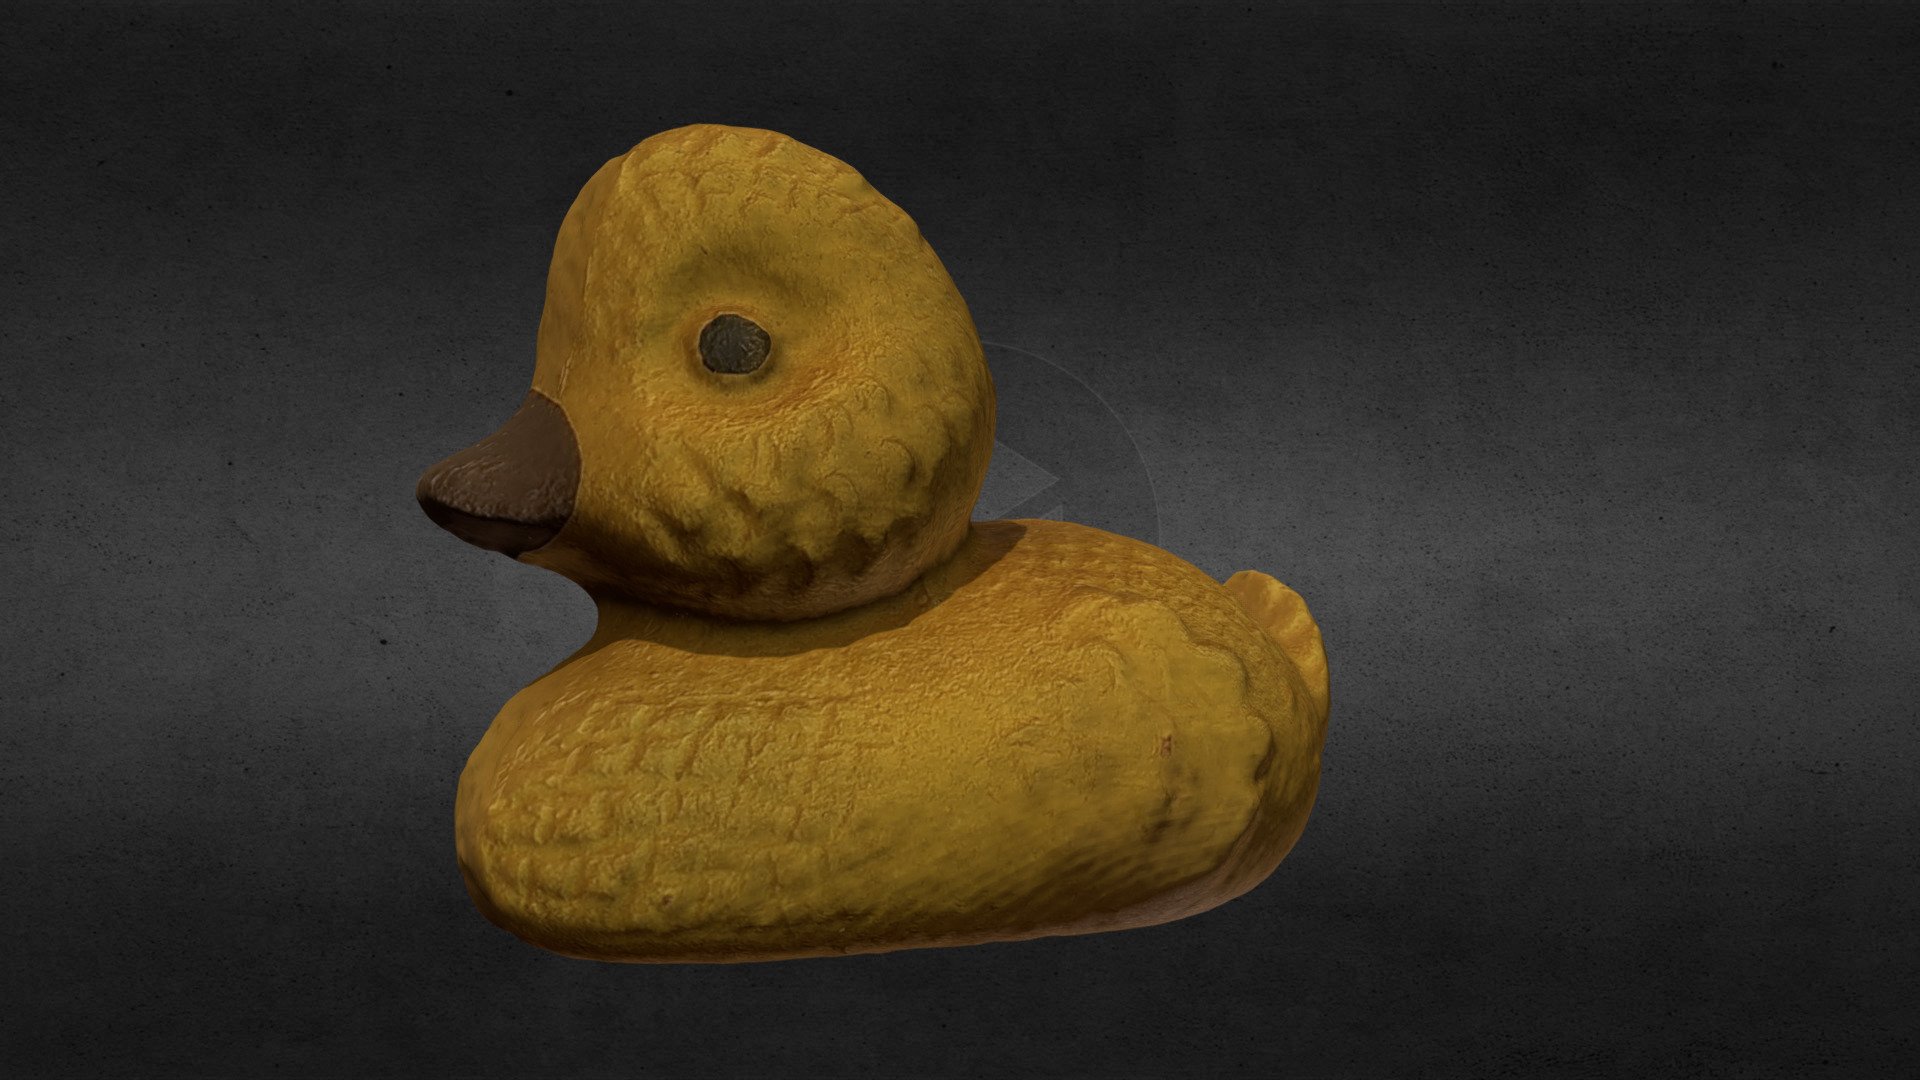 Old USSR Soviet Rubber Toy duck duckling Scan High Poly

Including OBJ formats and textures (8192x8192) TIF Albedo, Normal, Occlusion

Polygons: 101000 Triangles: 101000 Vertices: 50502 - Old USSR Soviet Rubber Toy duck duckling Scan - 3D model by Skeptic (@texturus) 3d model